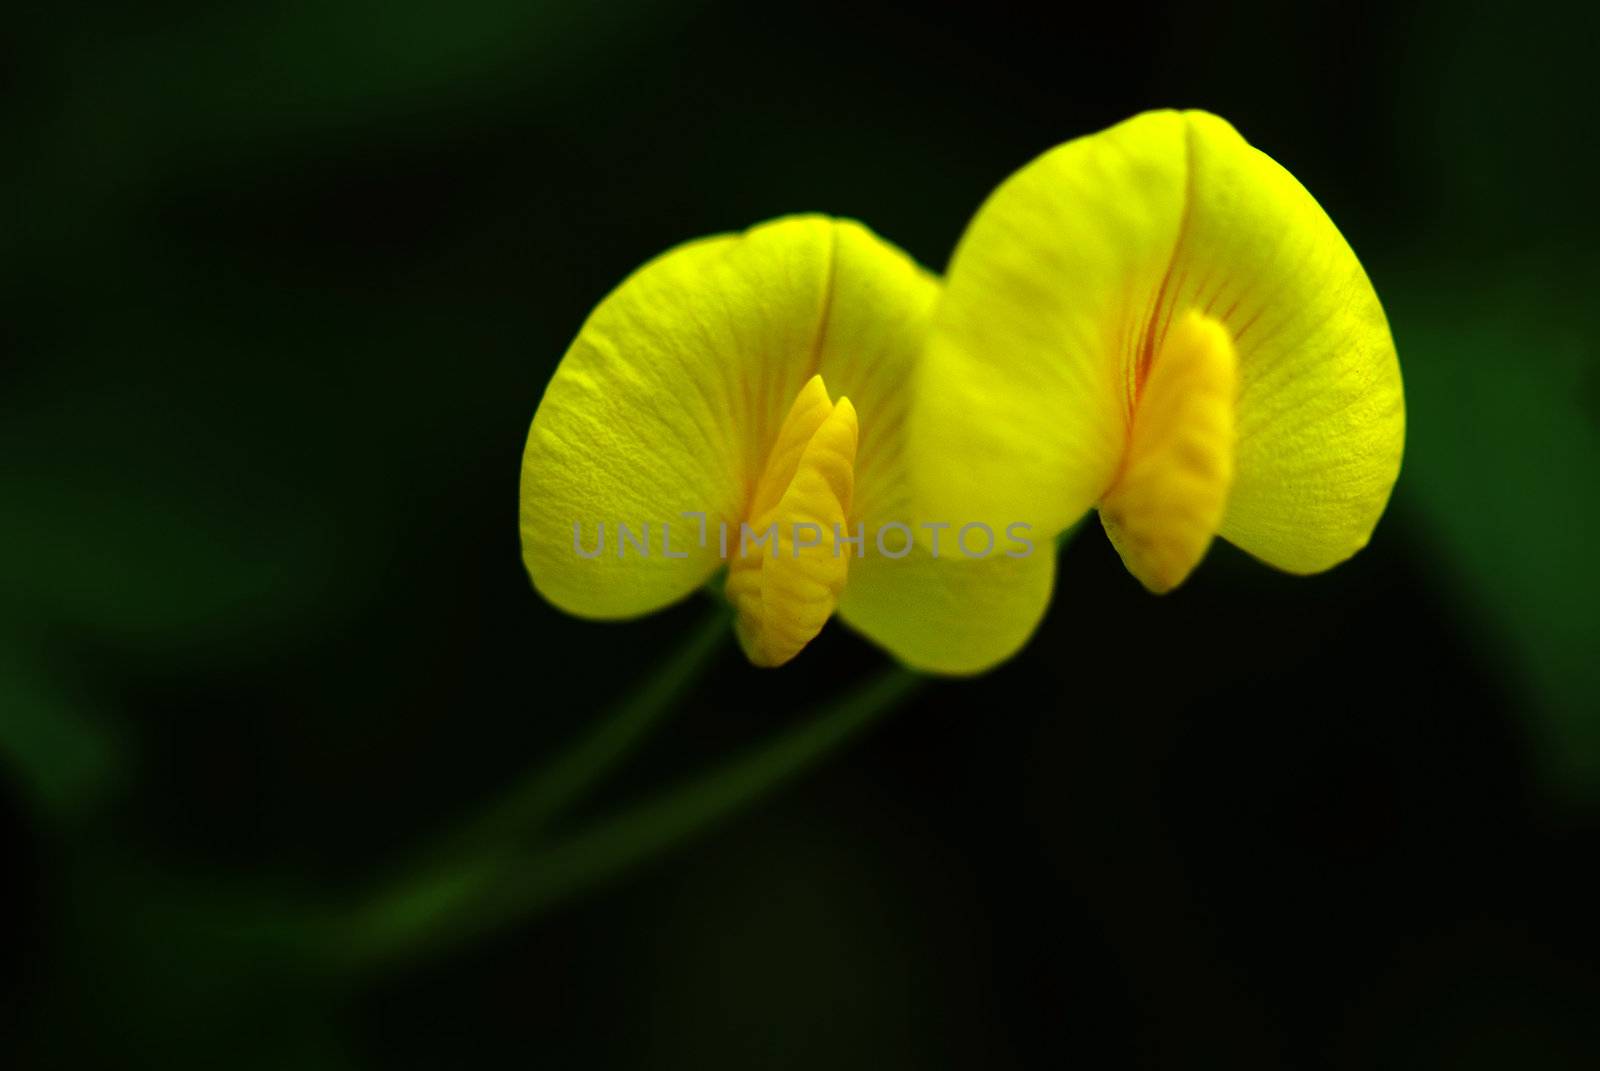 yellow flower - Arachis duranensis by xfdly5